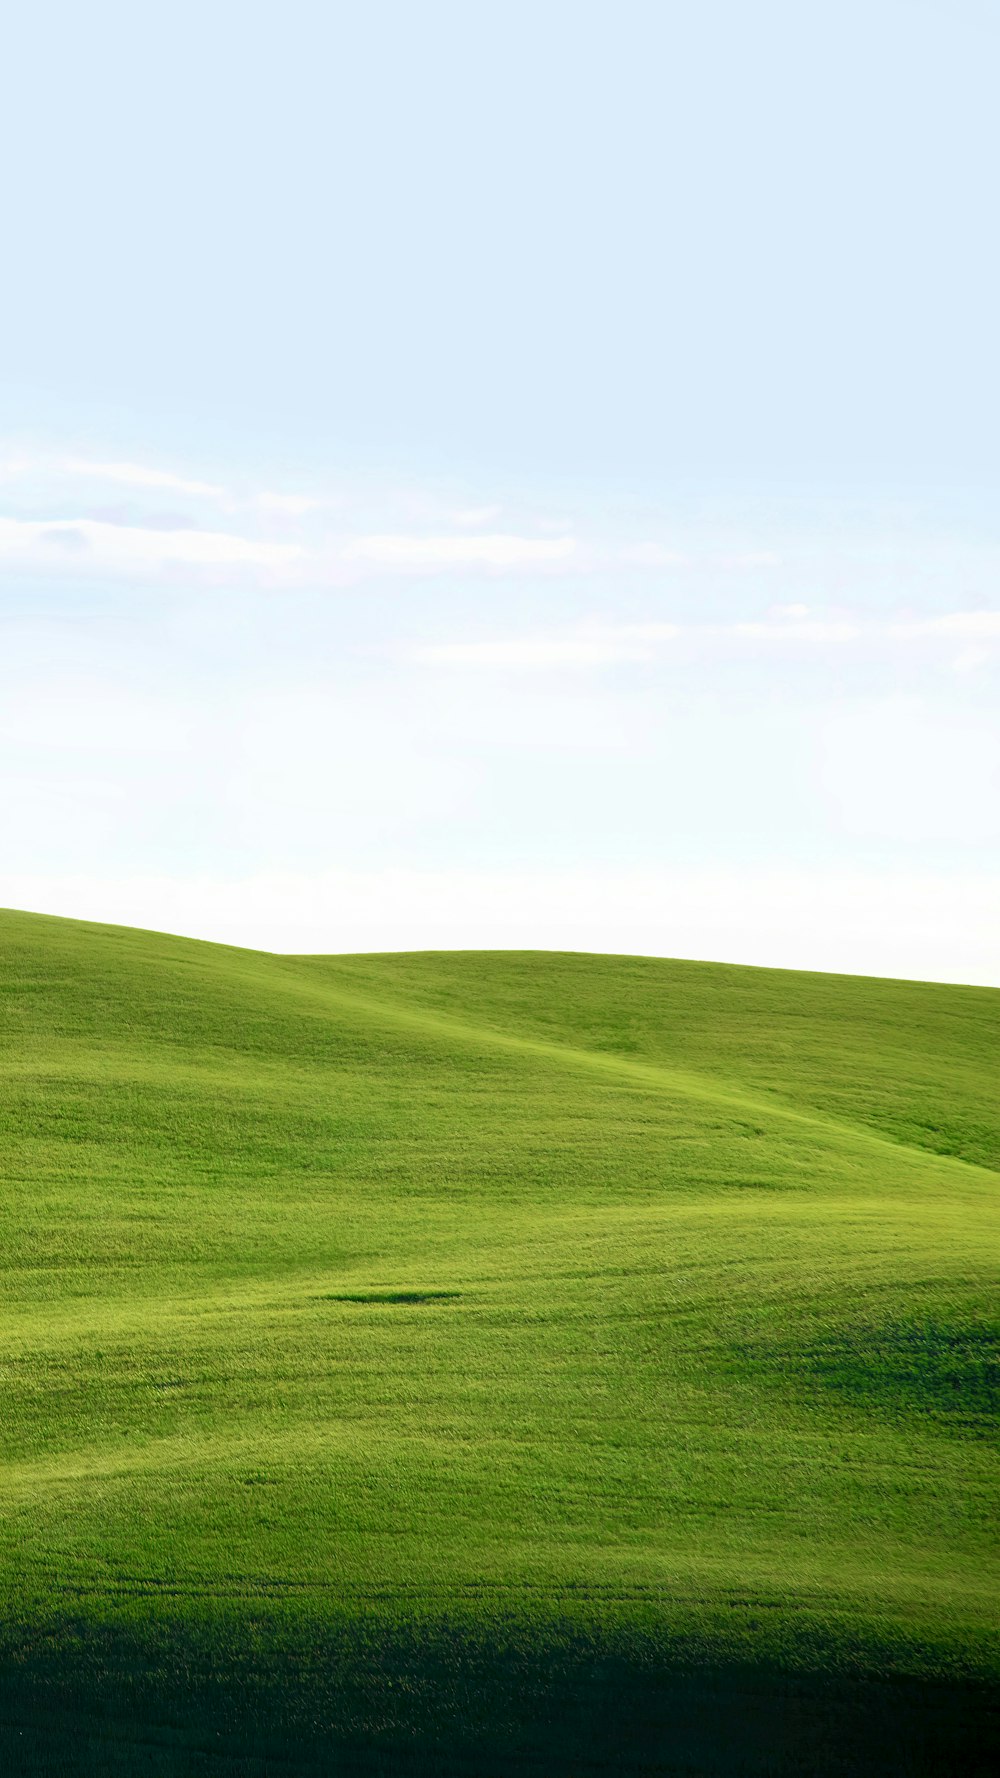 a grassy hill with a blue sky